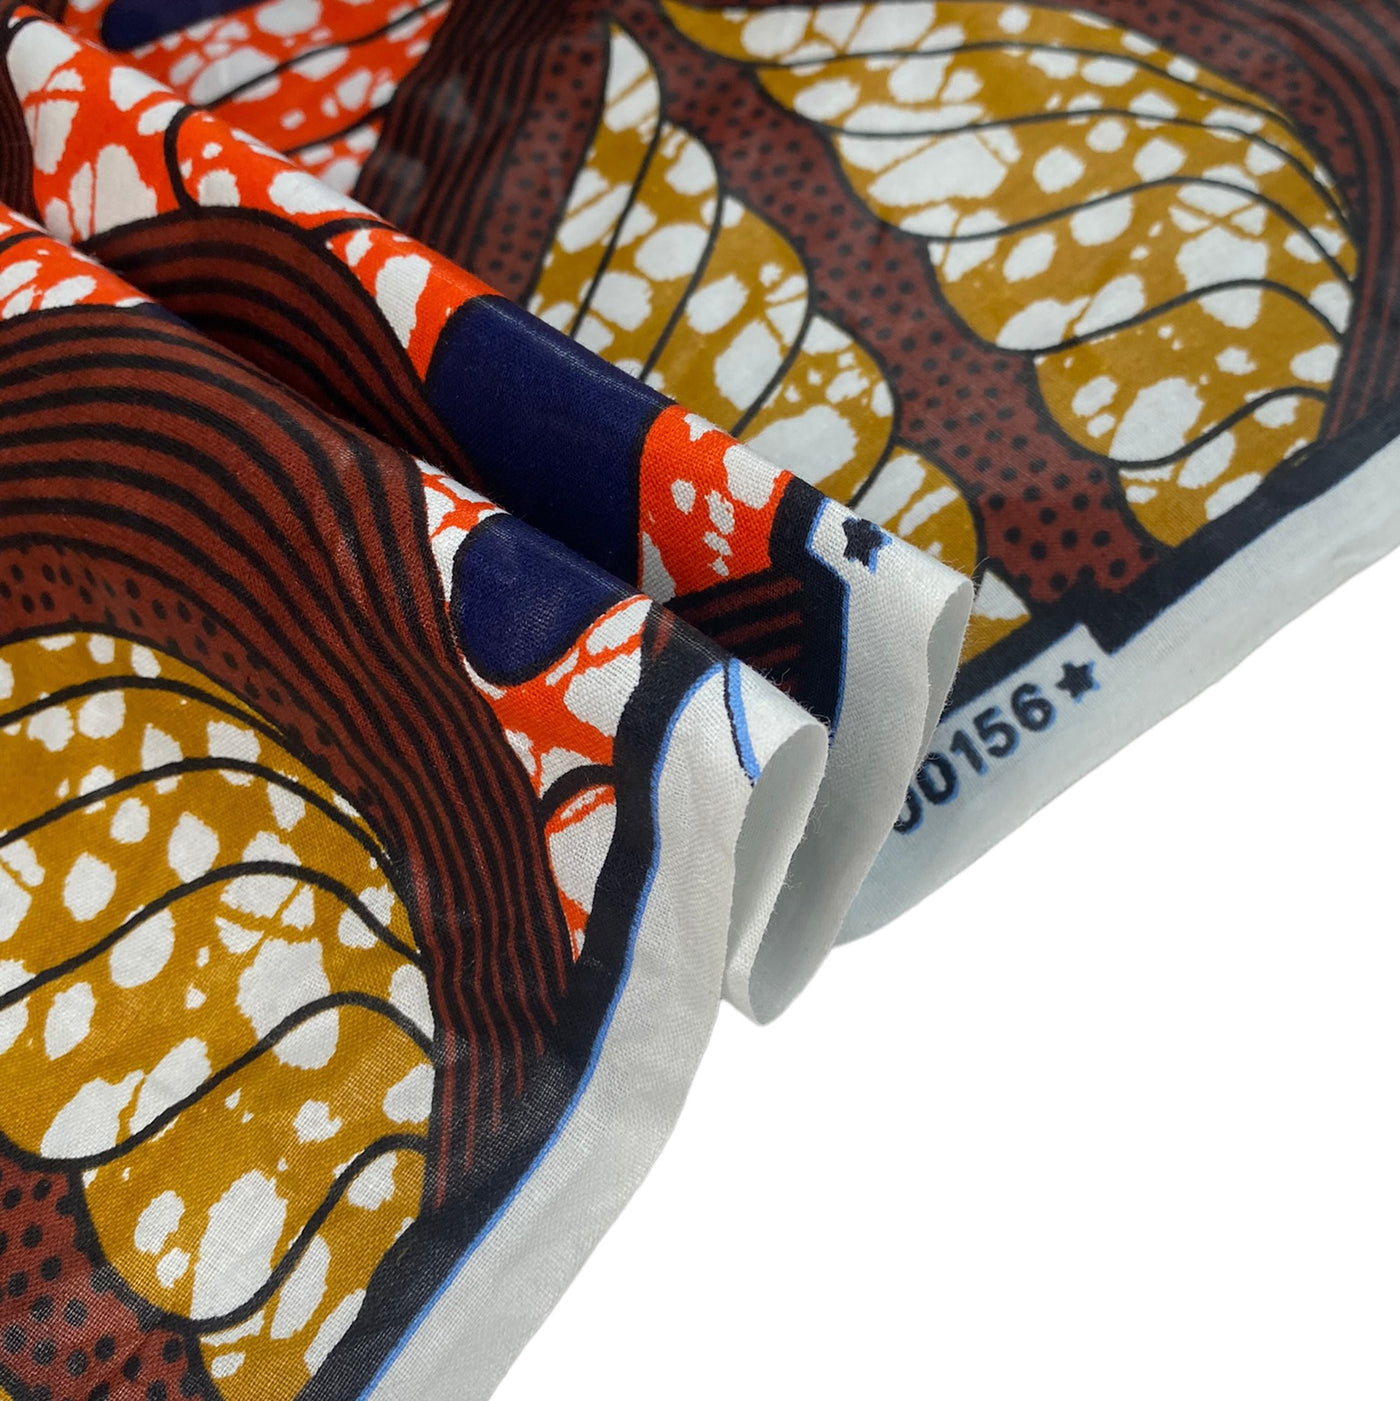 Waxed African Printed Cotton - Brown/Orange